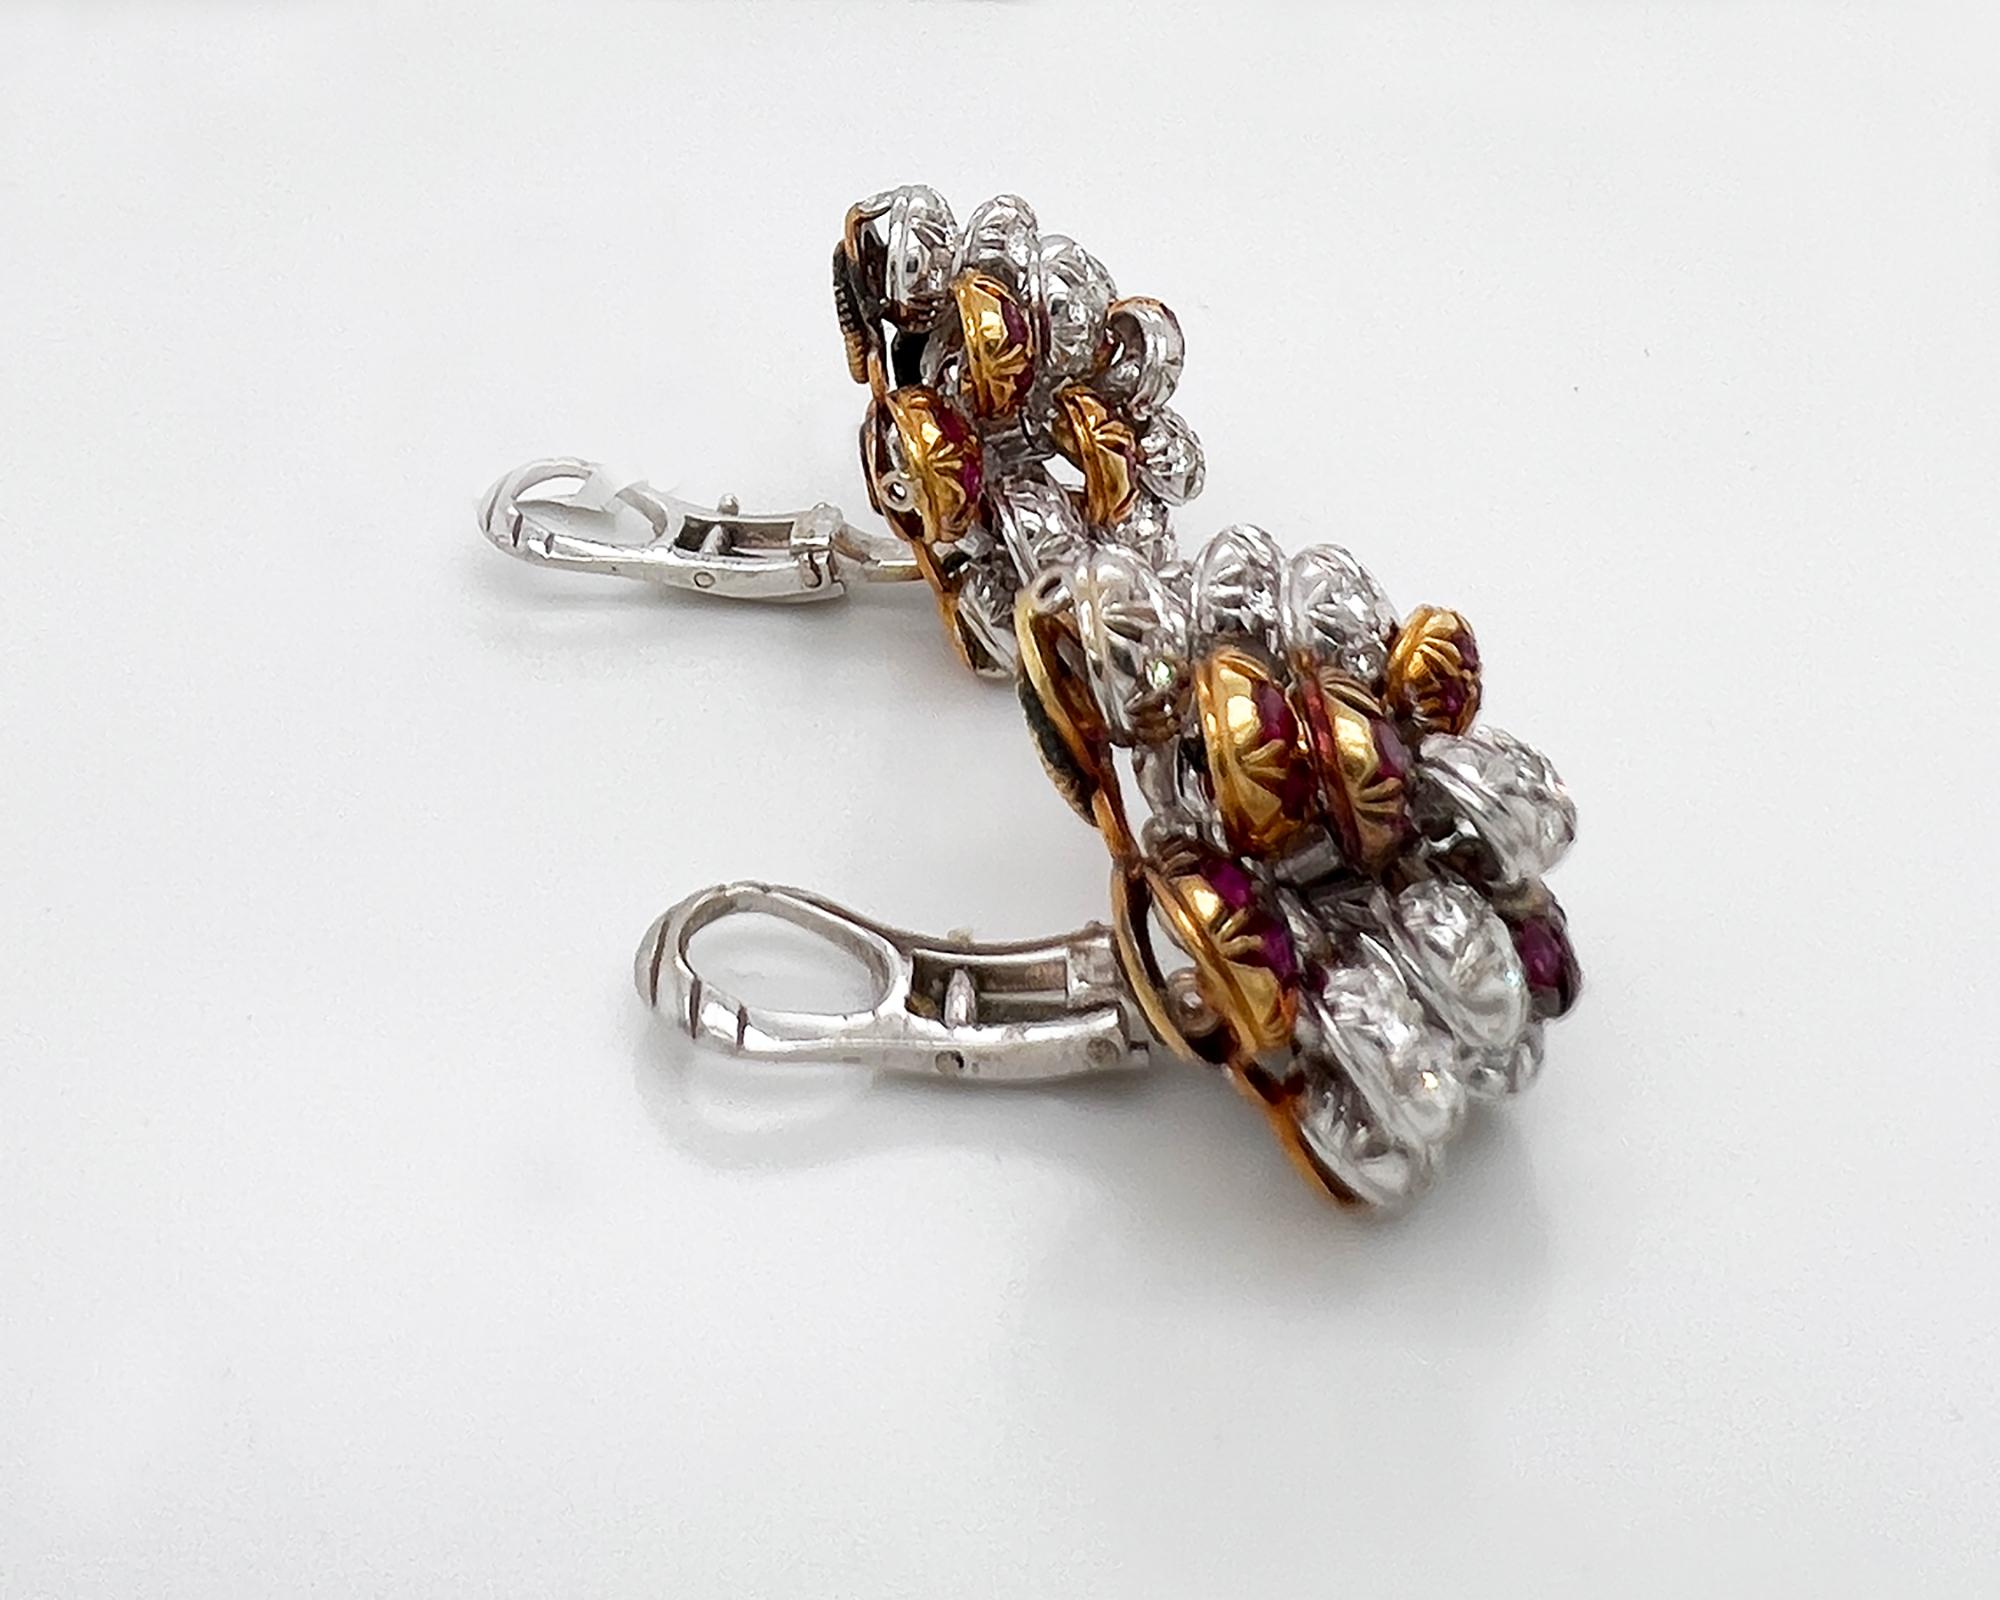 Beautiful ear clips made by Cartier in 1980s. 
Designed as clusters of balls set with diamonds and rubies arranged in multi layers. 
Metal is 18k white & yellow gold, 26.78 grams.
Signed Cartier Italy.
Clip-on style.